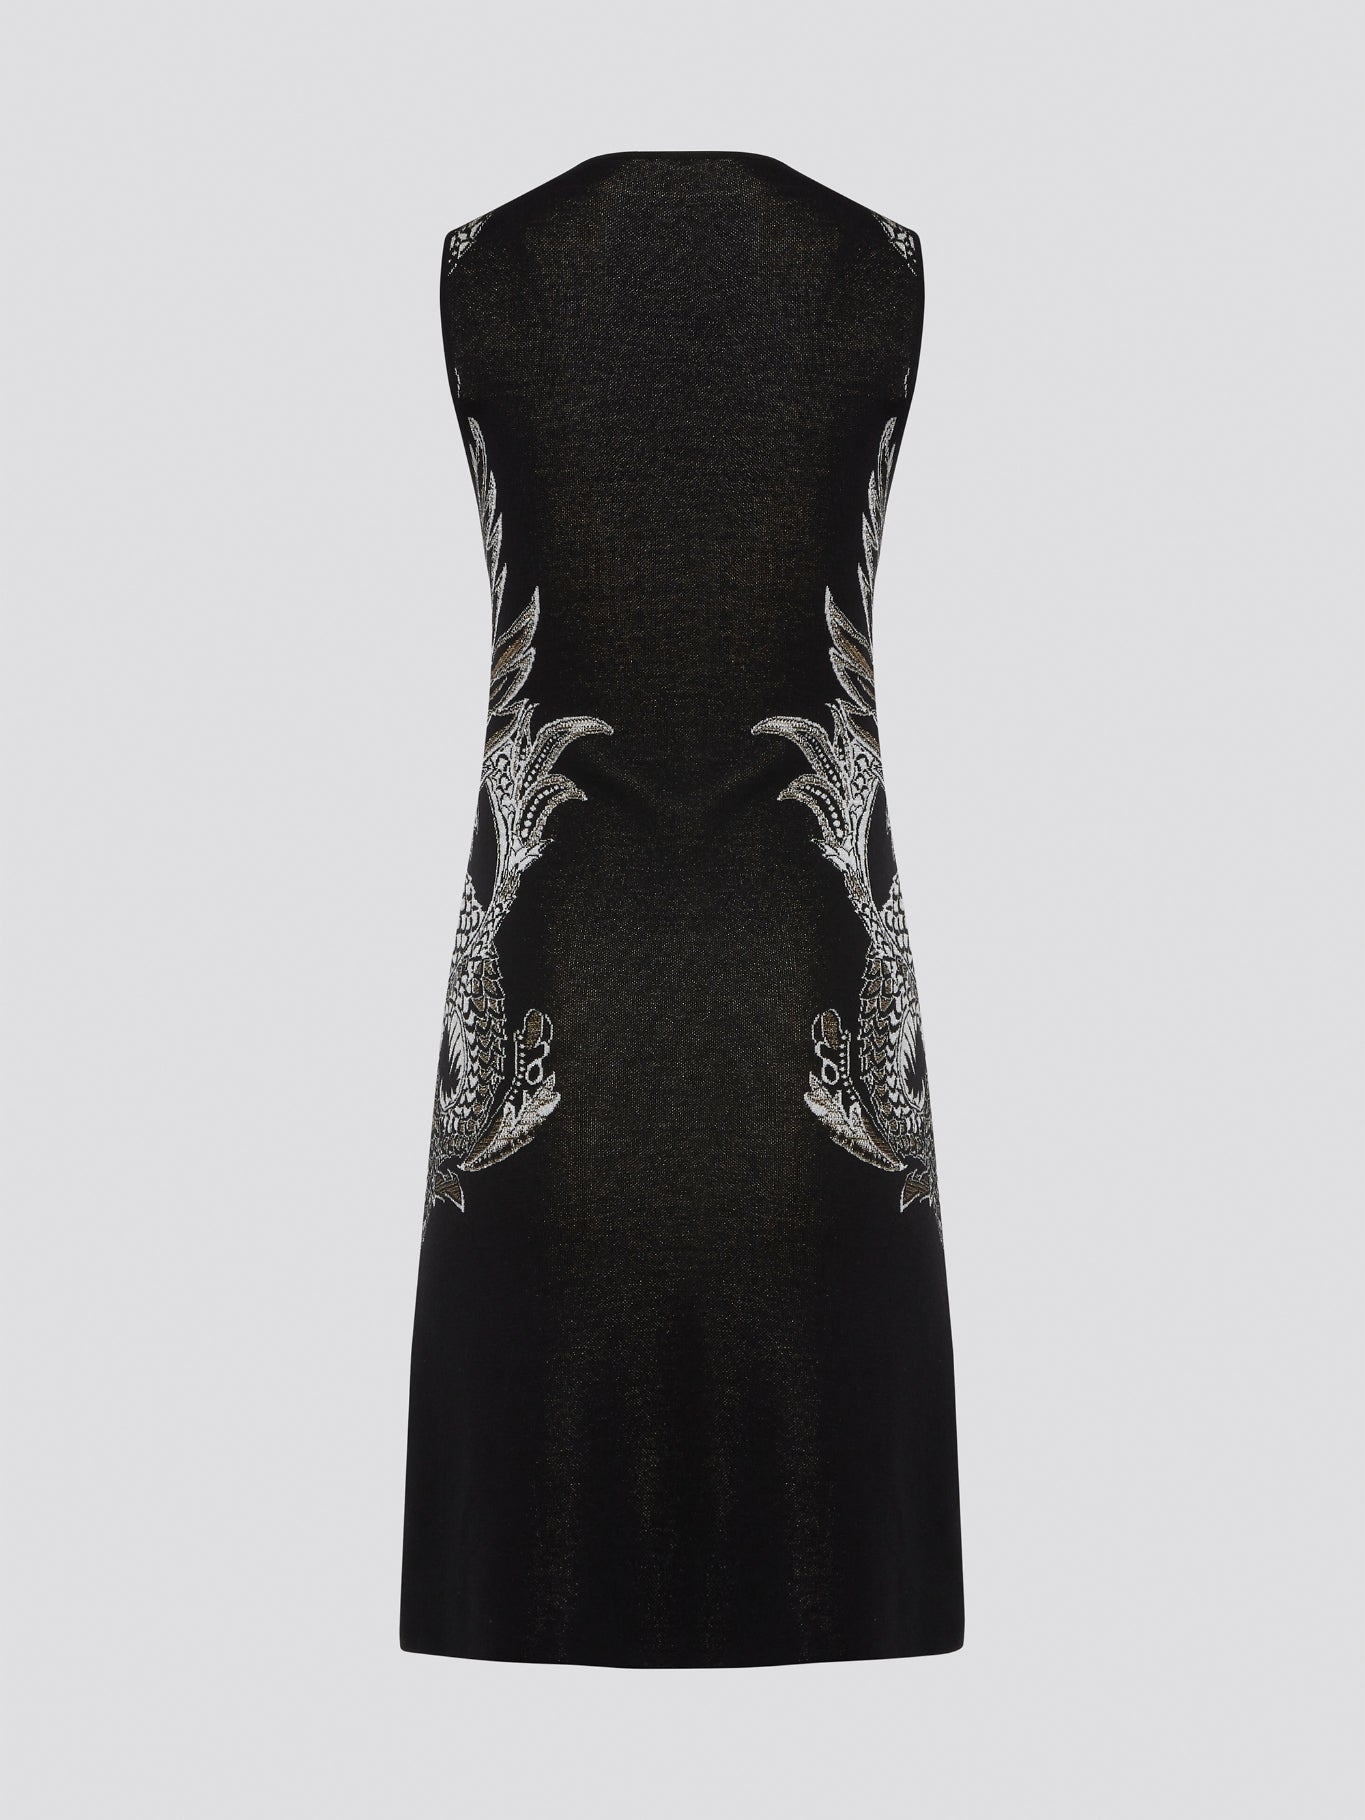 Elevate your wardrobe with the exquisite Knitted Bodycon Dress by Roberto Cavalli. Crafted with precision and care, this dress features intricate knitted details that hug your curves in all the right places. Make a statement at any event with this luxurious and unique piece that exudes elegance and style.